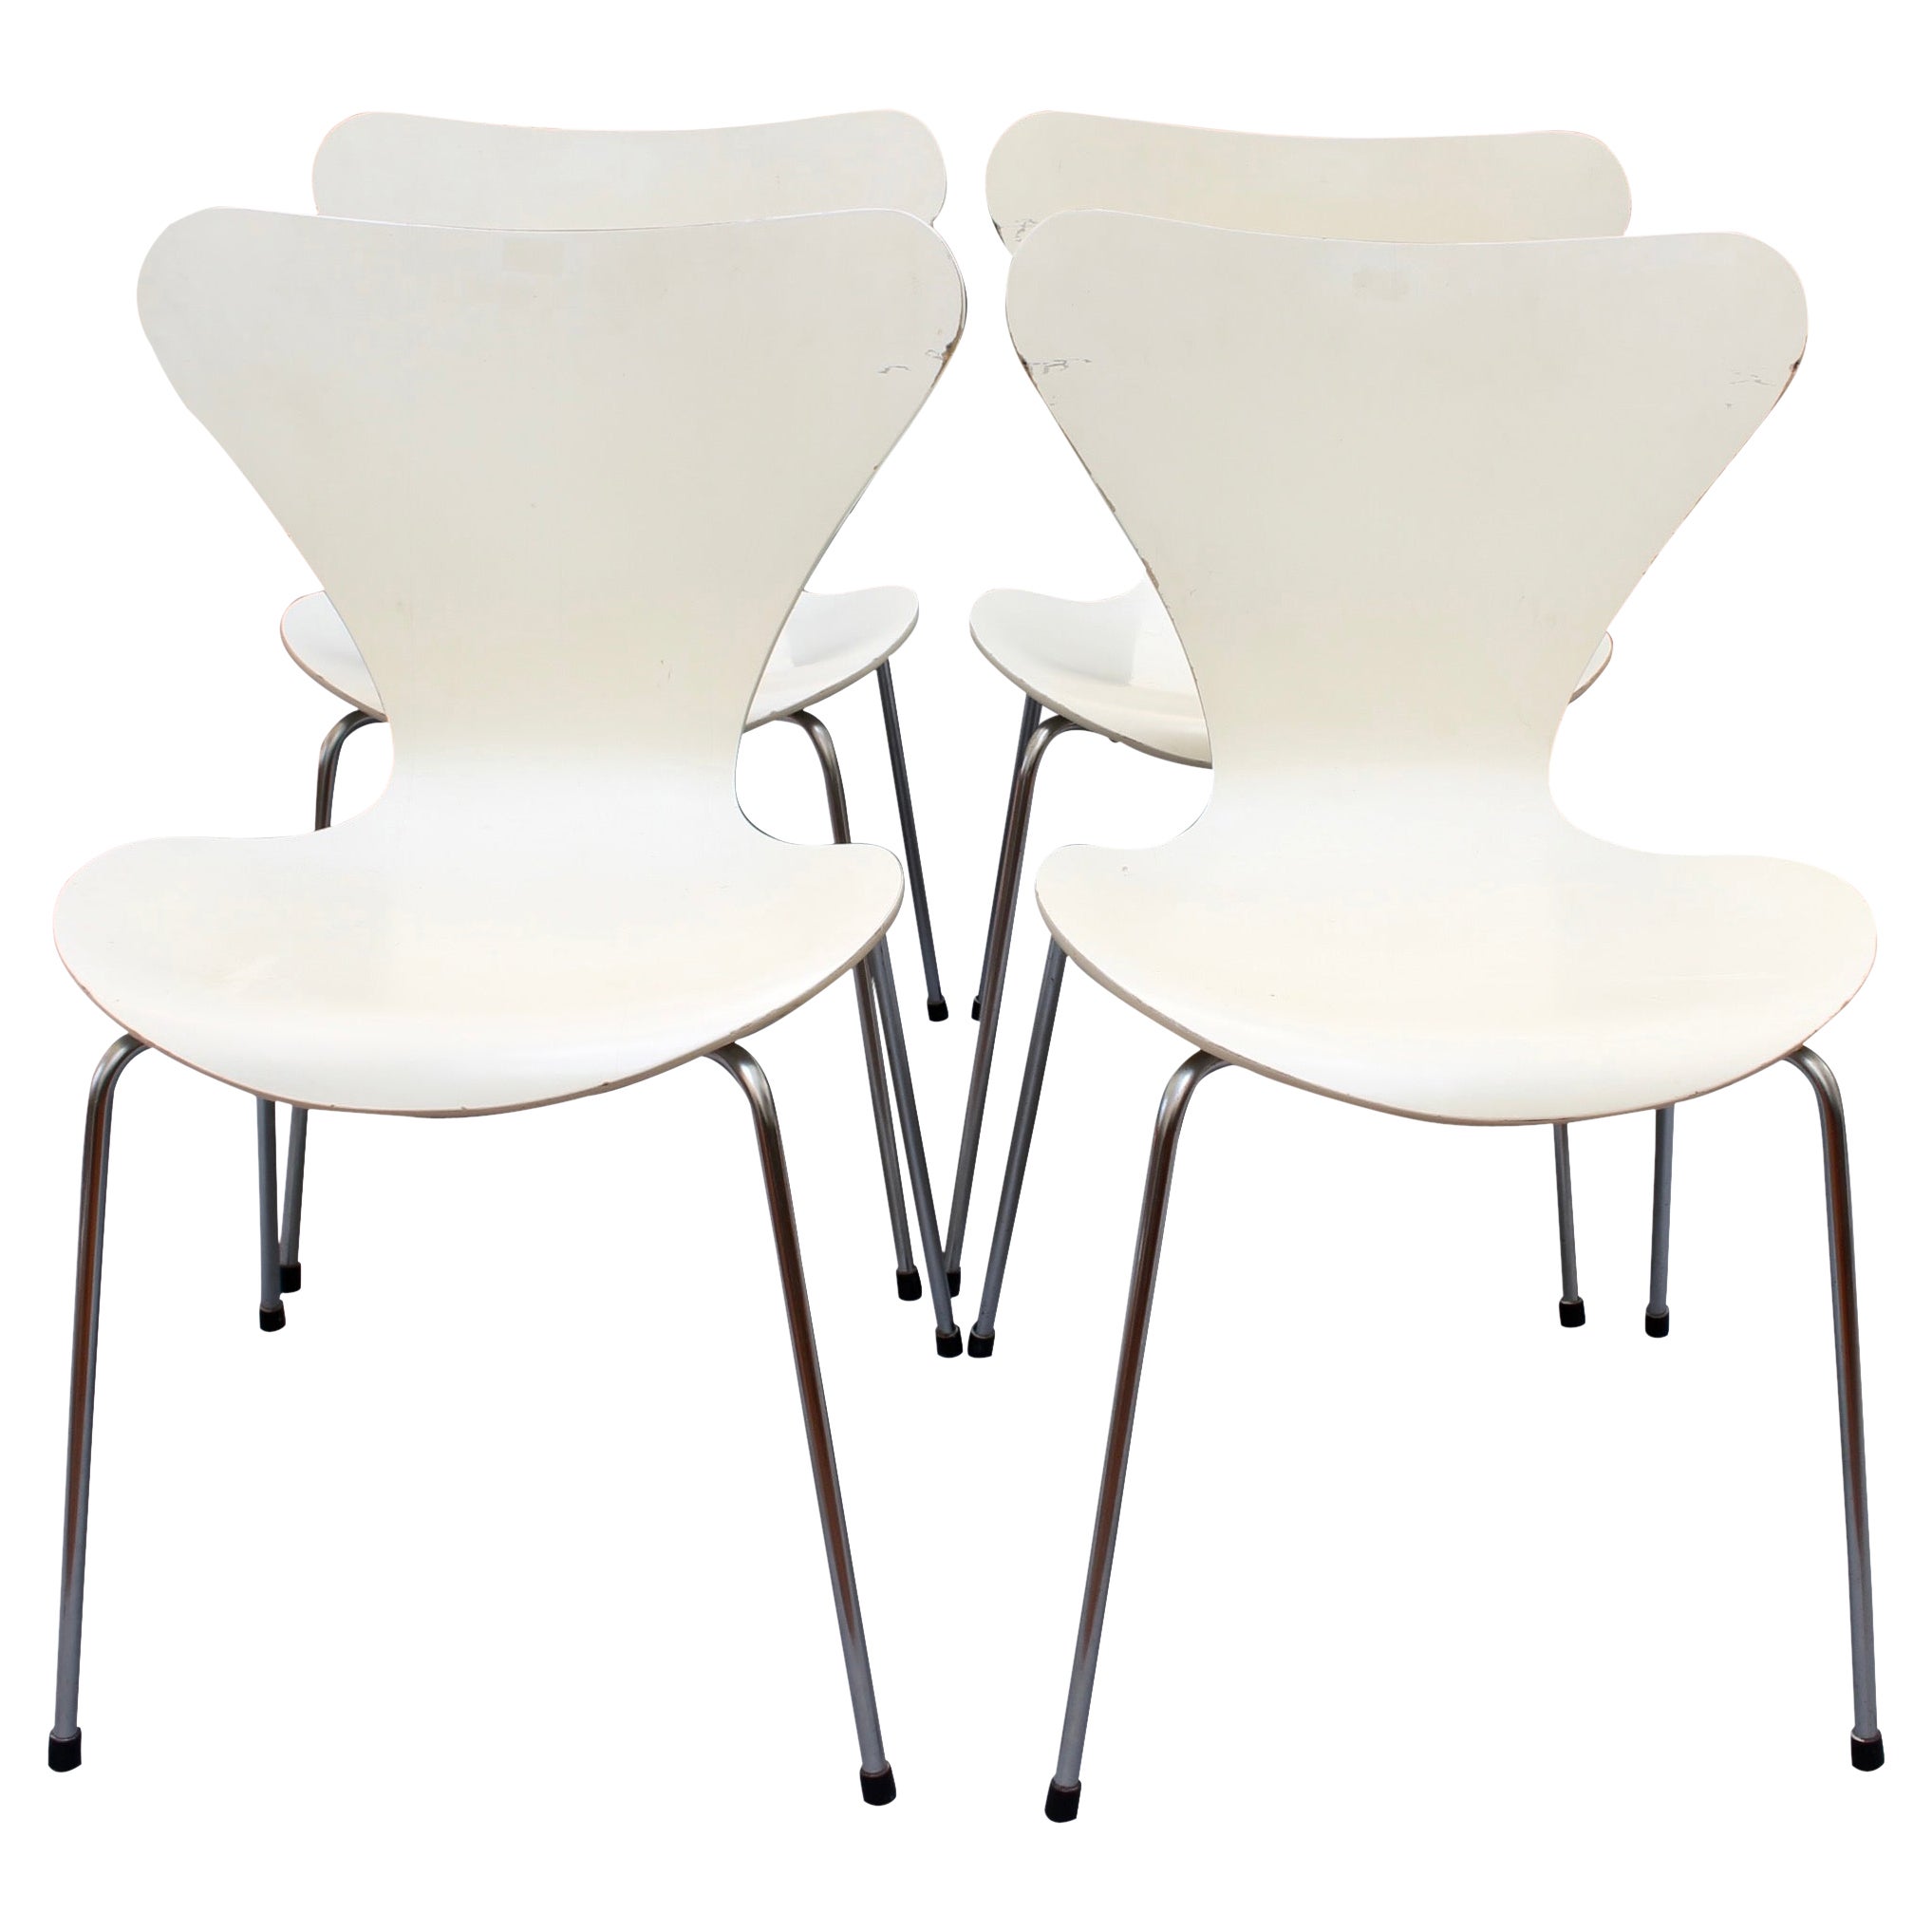 Set of Four 'Series 7' White Chairs by Arne Jacobsen for Fritz Hansen, 1973